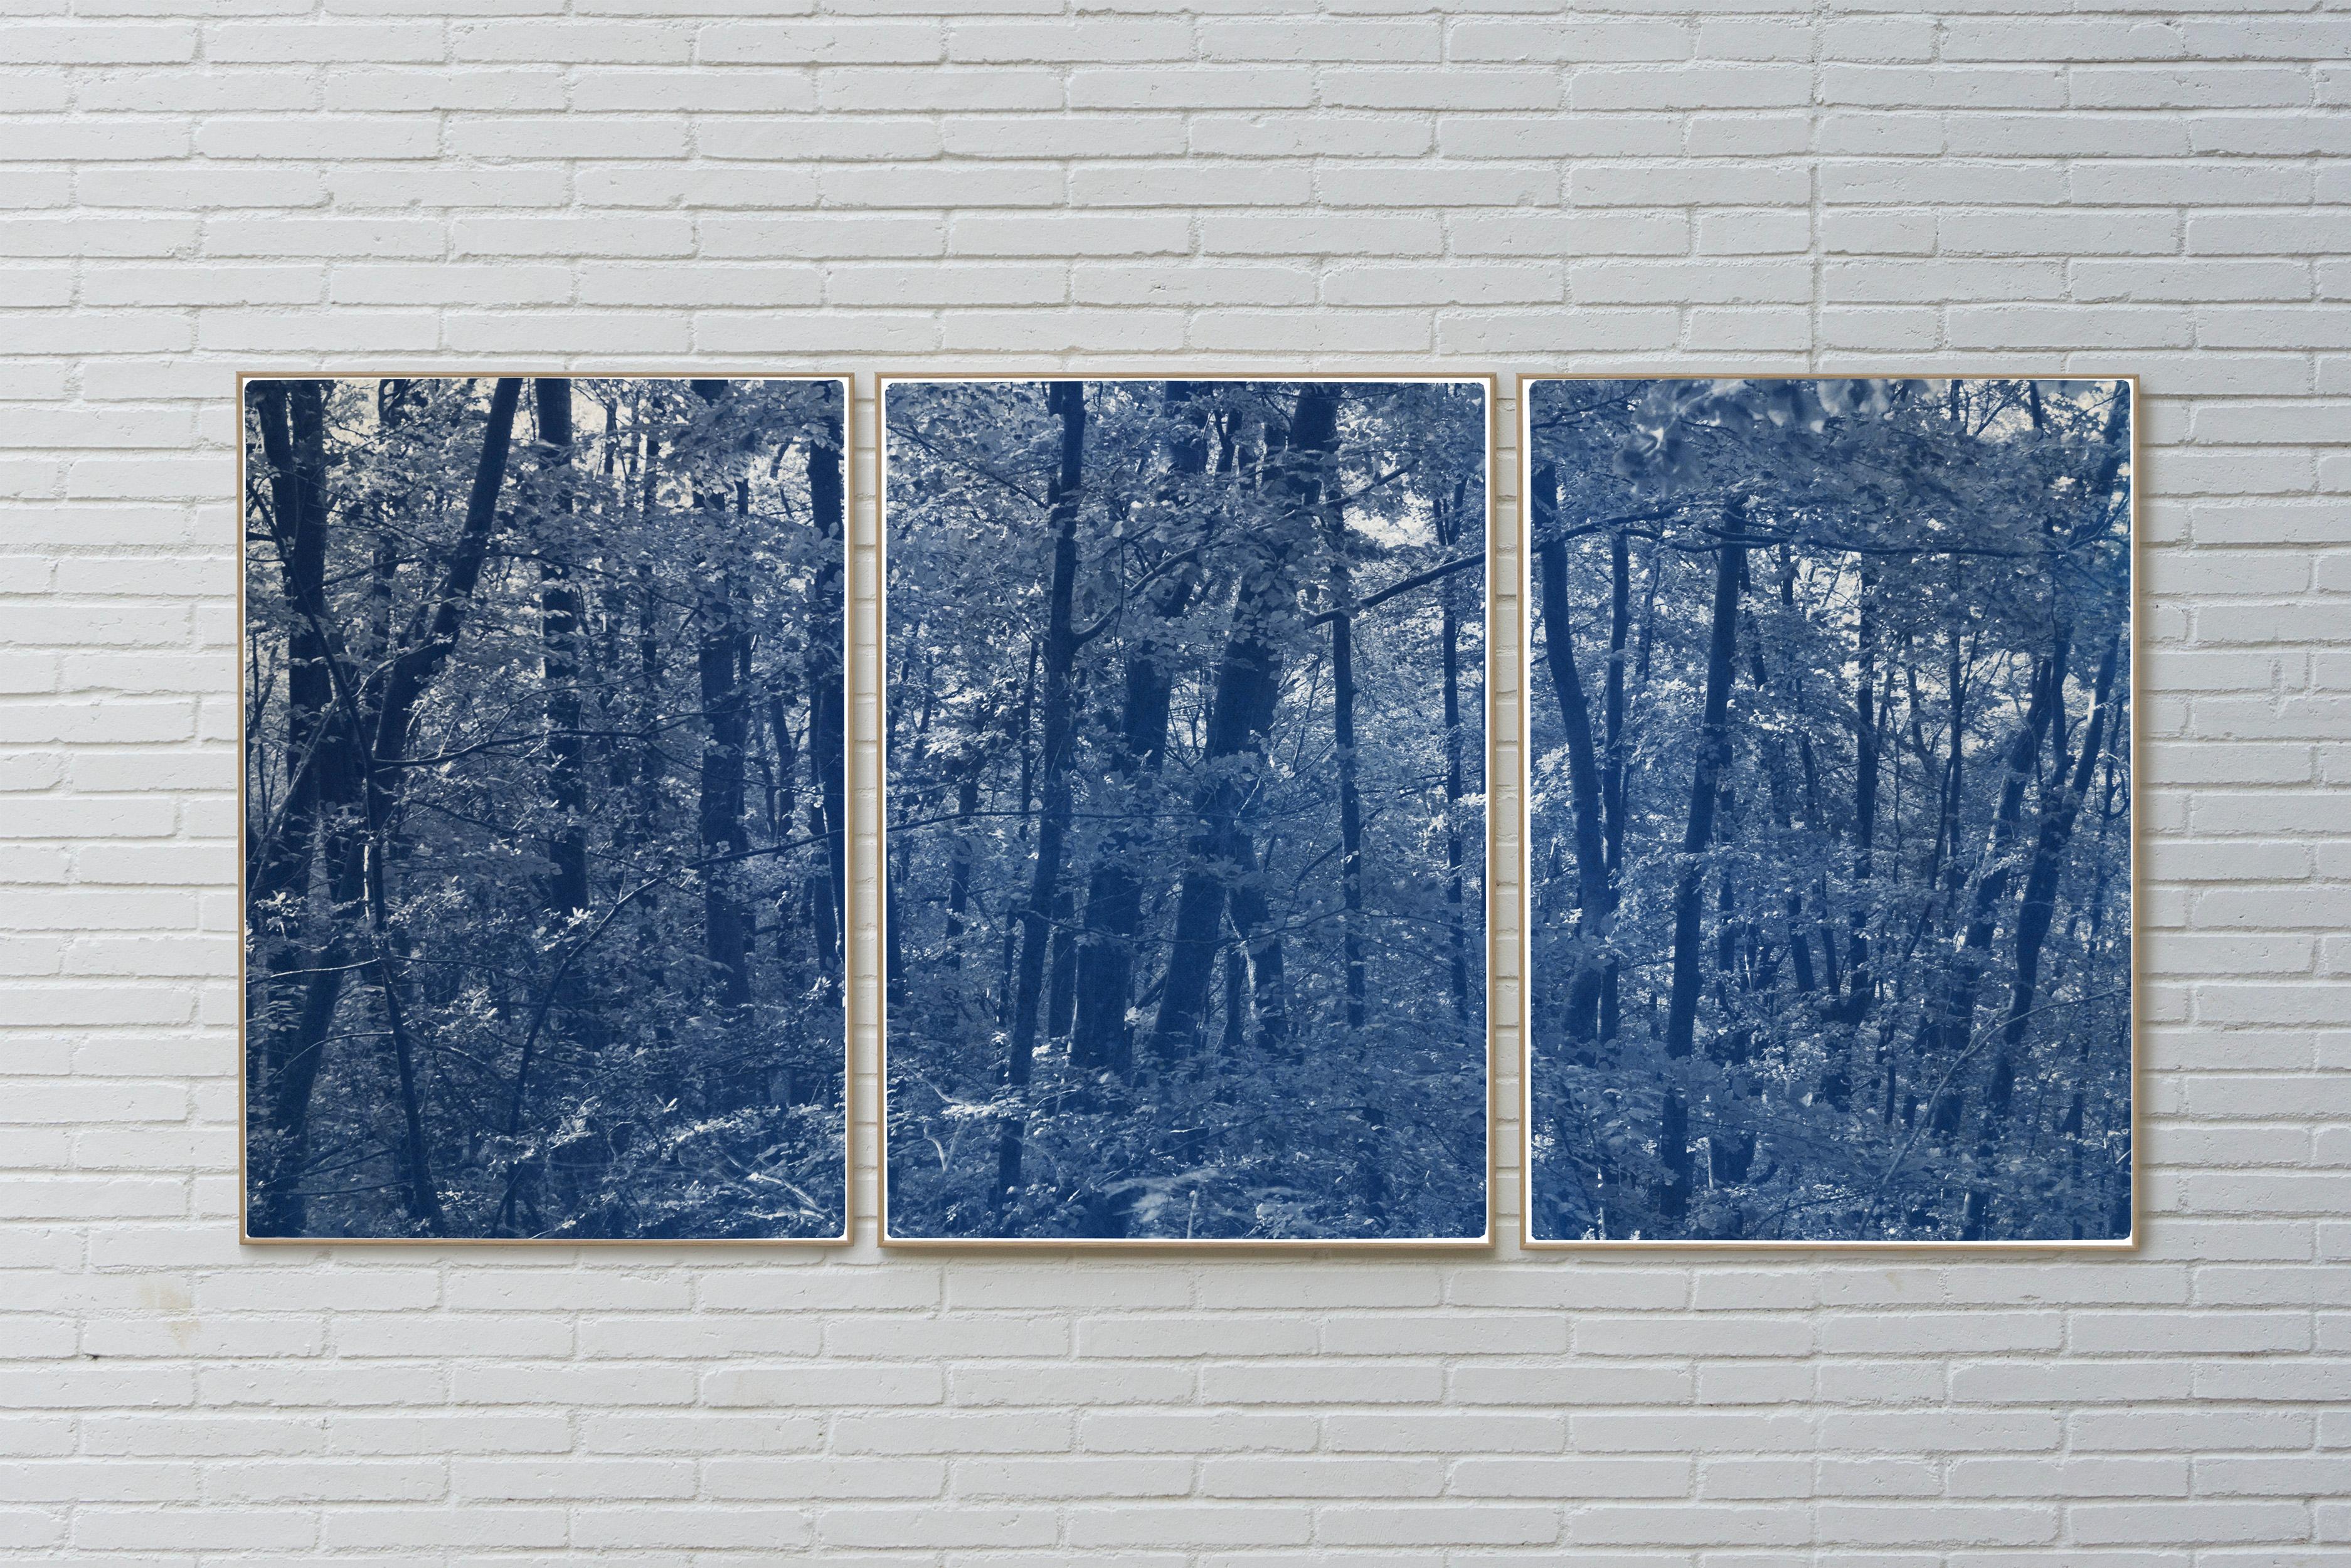 This is an exclusive handprinted limited edition cyanotype of a beautiful forest journey. 

Details:
+ Title: Walking in the Woods
+ Year: 2021
+ Edition Size: 100
+ Stamped and Certificate of Authenticity provided
+ Measurements : 100x210 cm (40 x